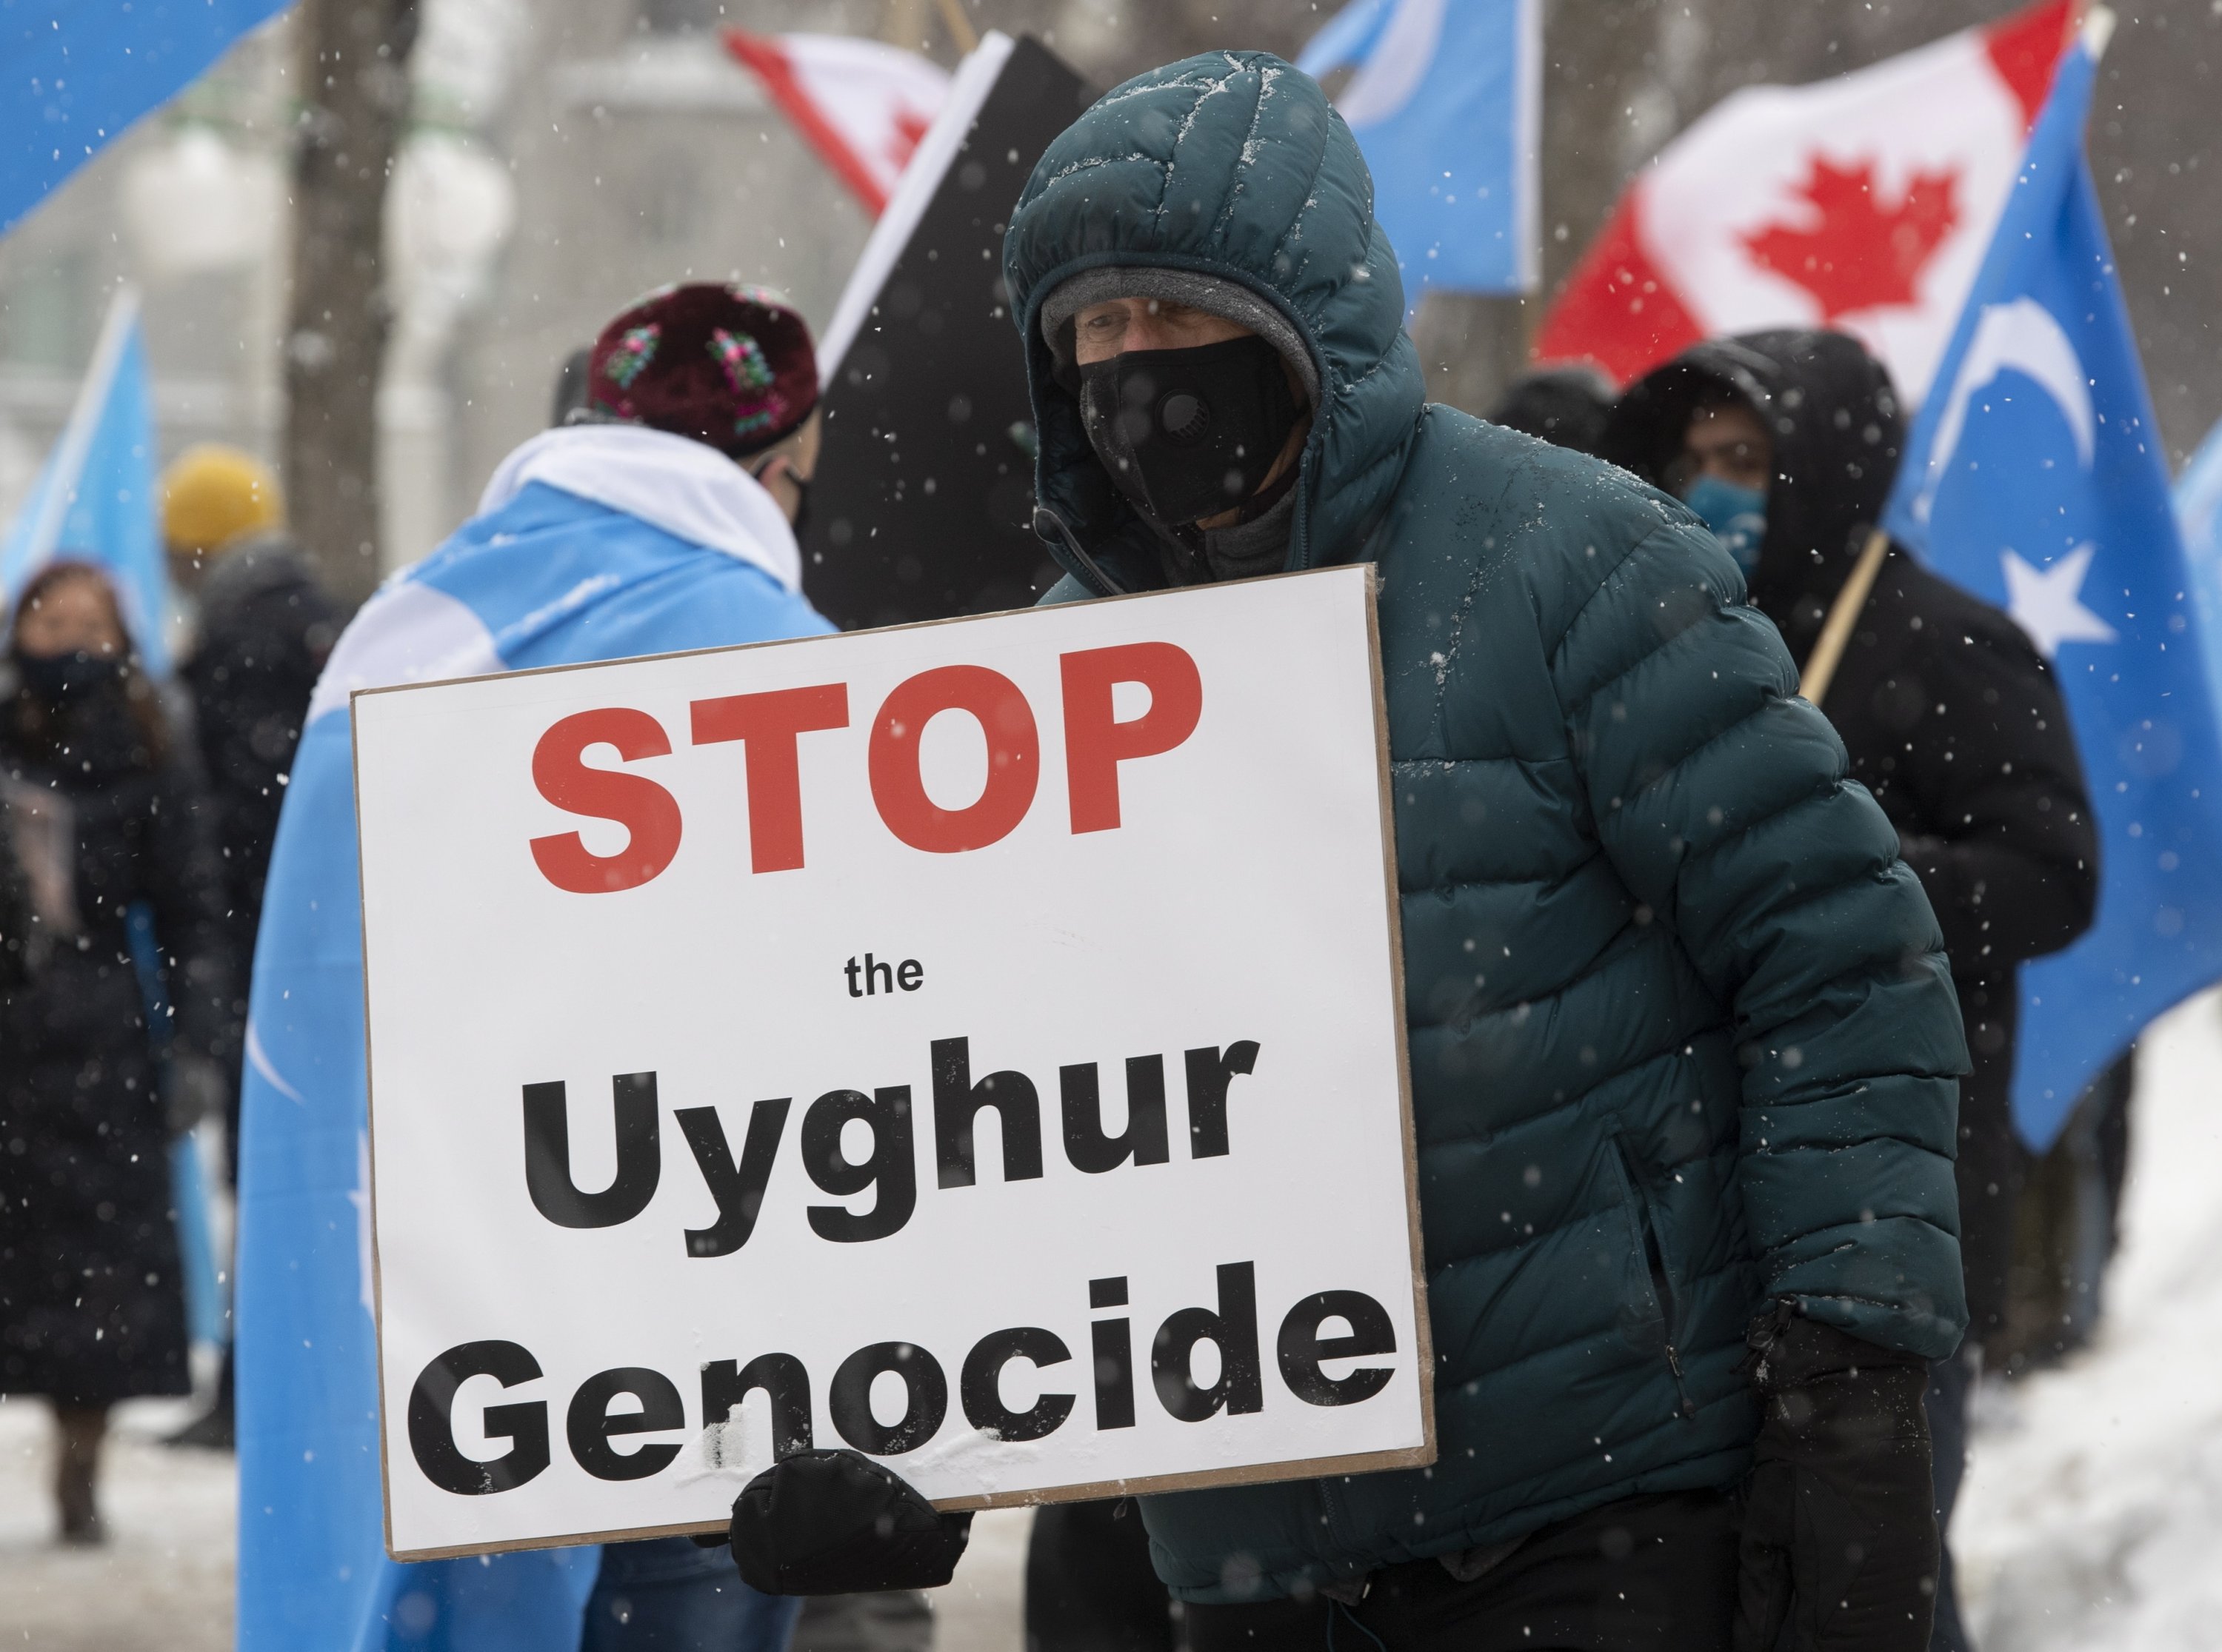 Canada recognizes China's treatment of Uighurs as 'genocide' | Daily Sabah